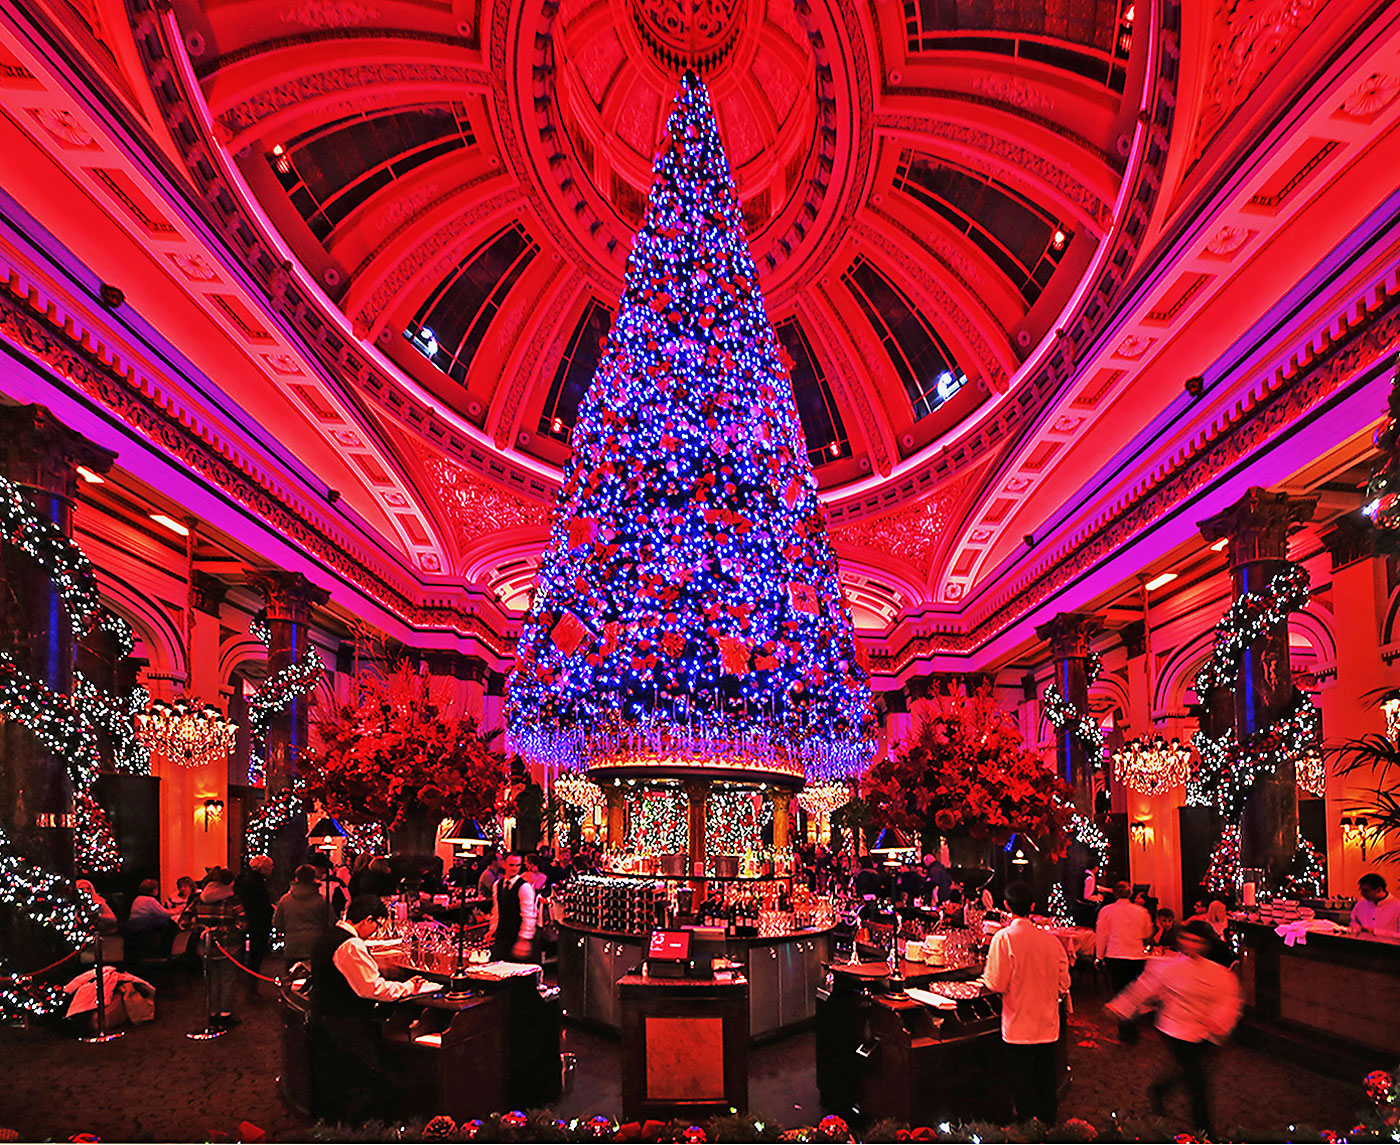 The Dome Restaurant, 14 George Street  -  Staff at work beneath the Christmas Tree